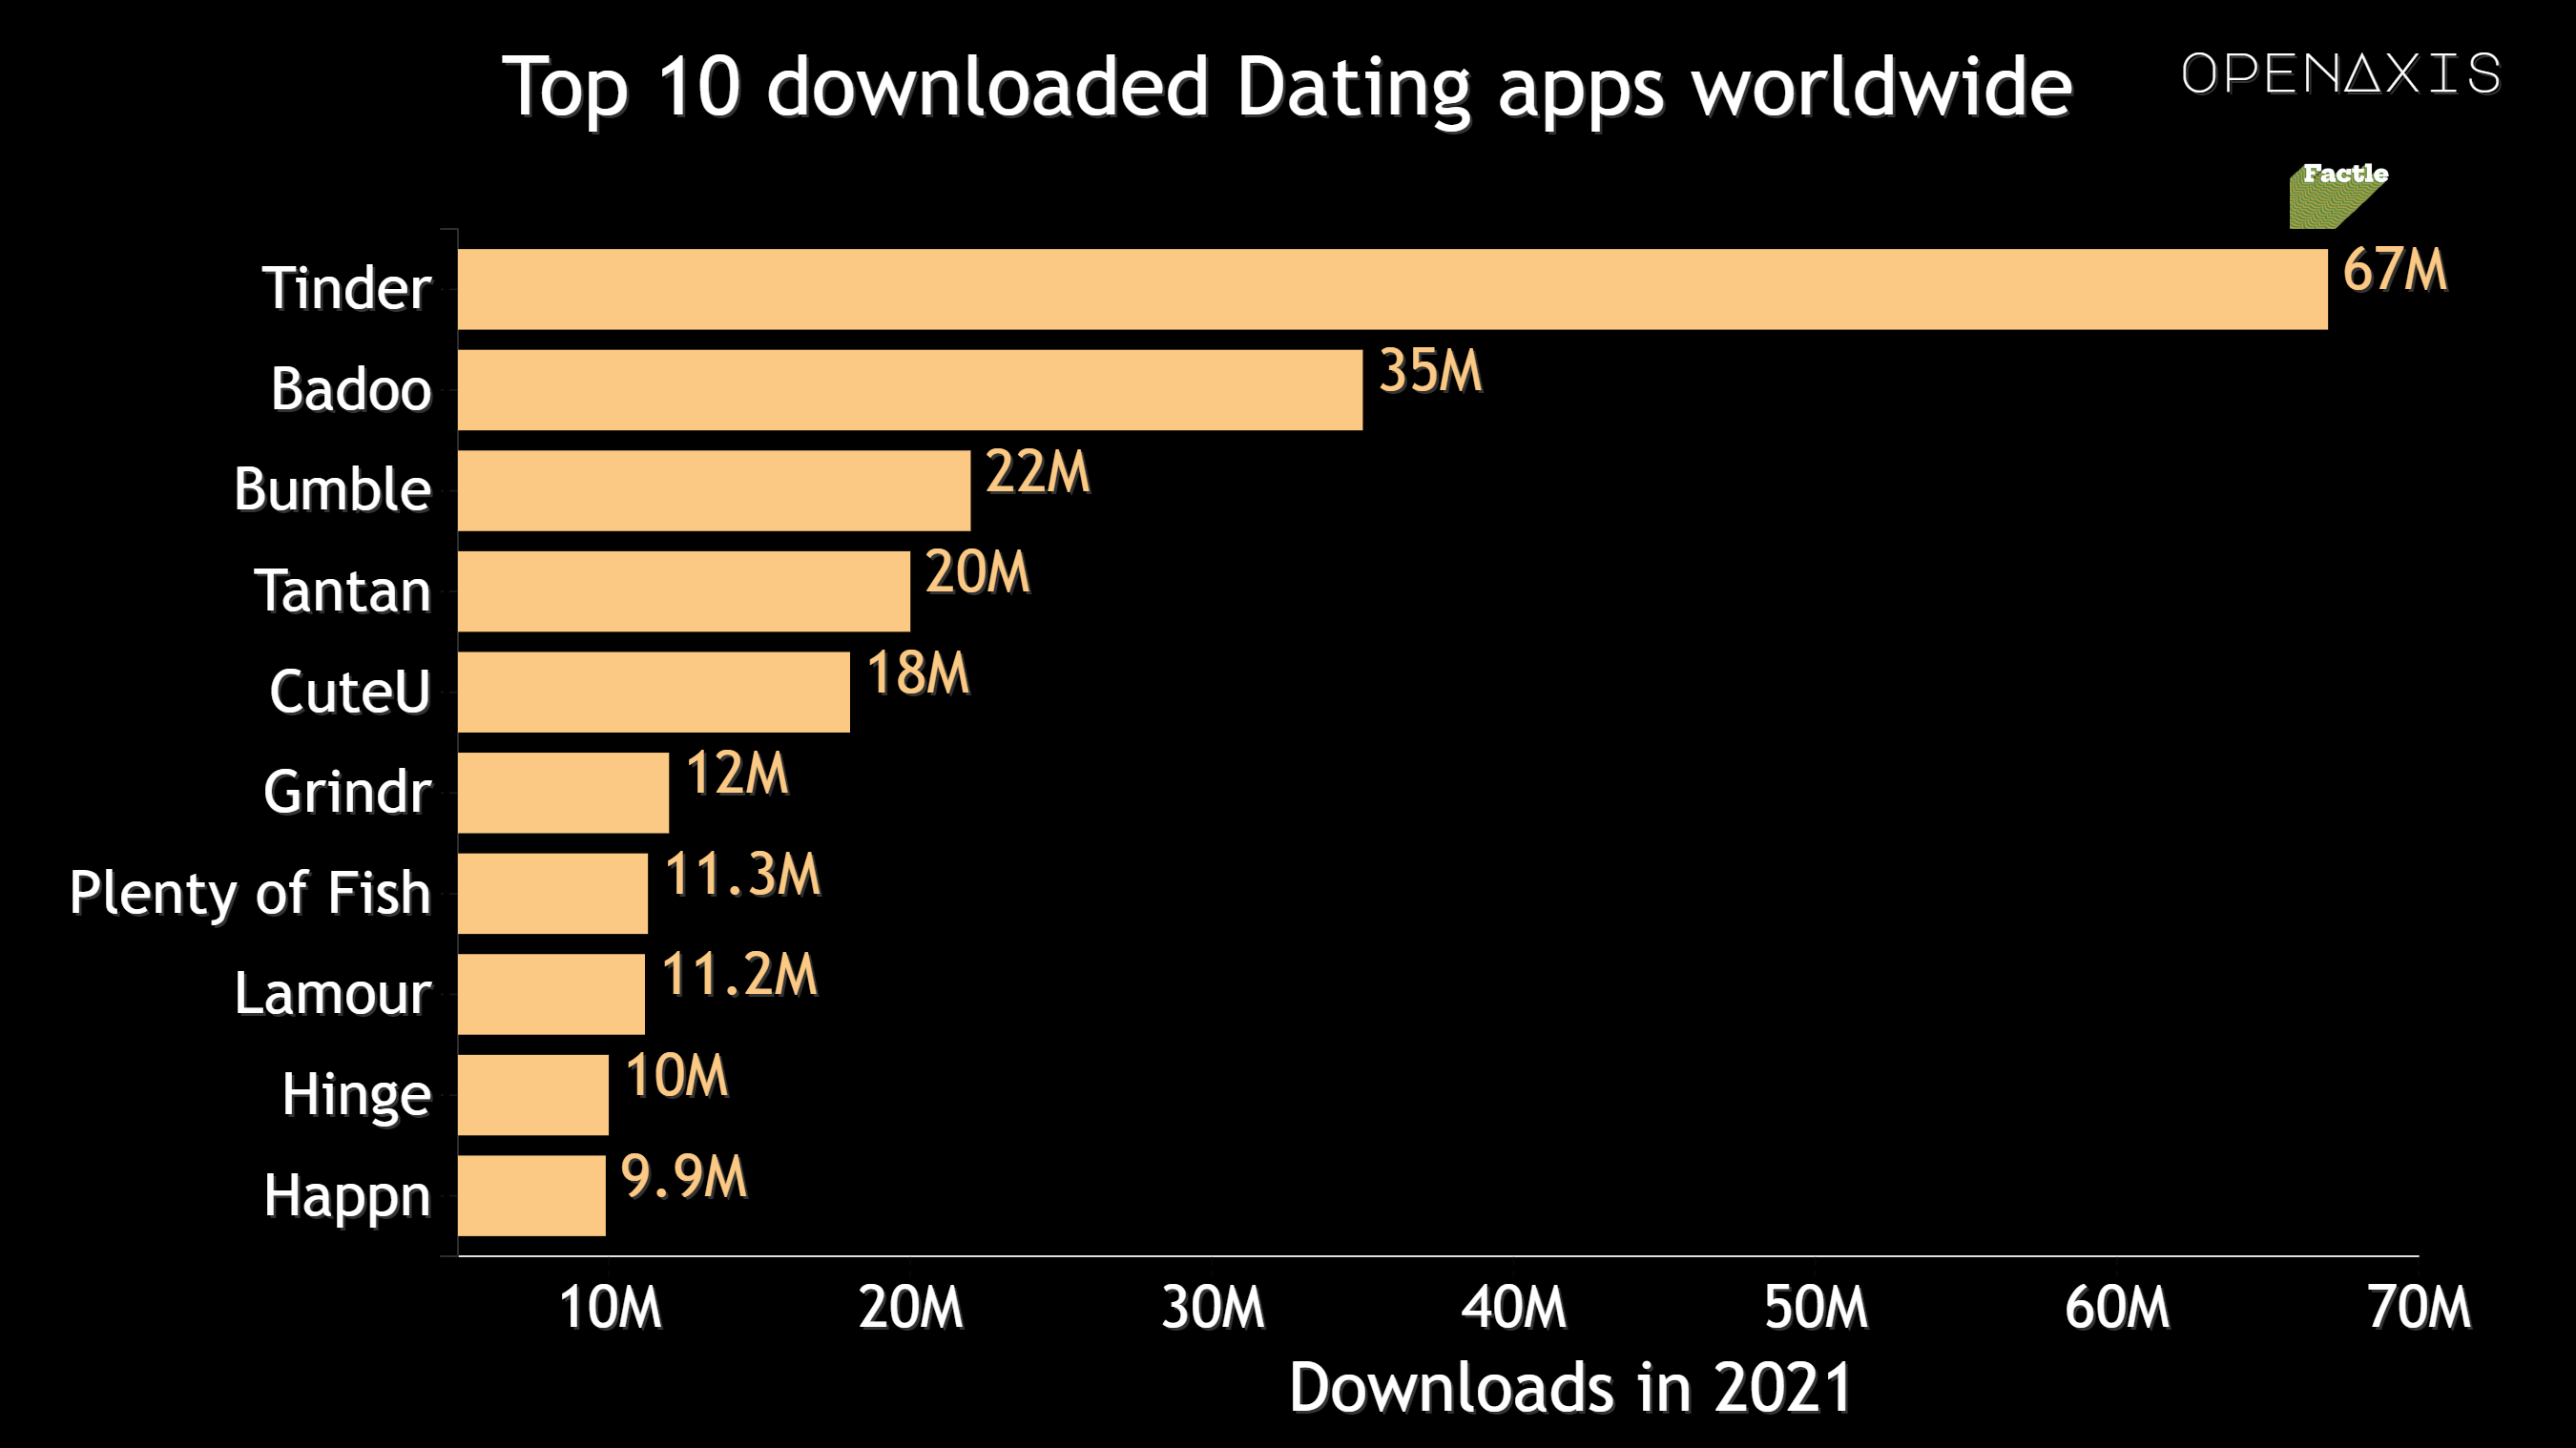 "Top 10 downloaded Dating apps worldwide"